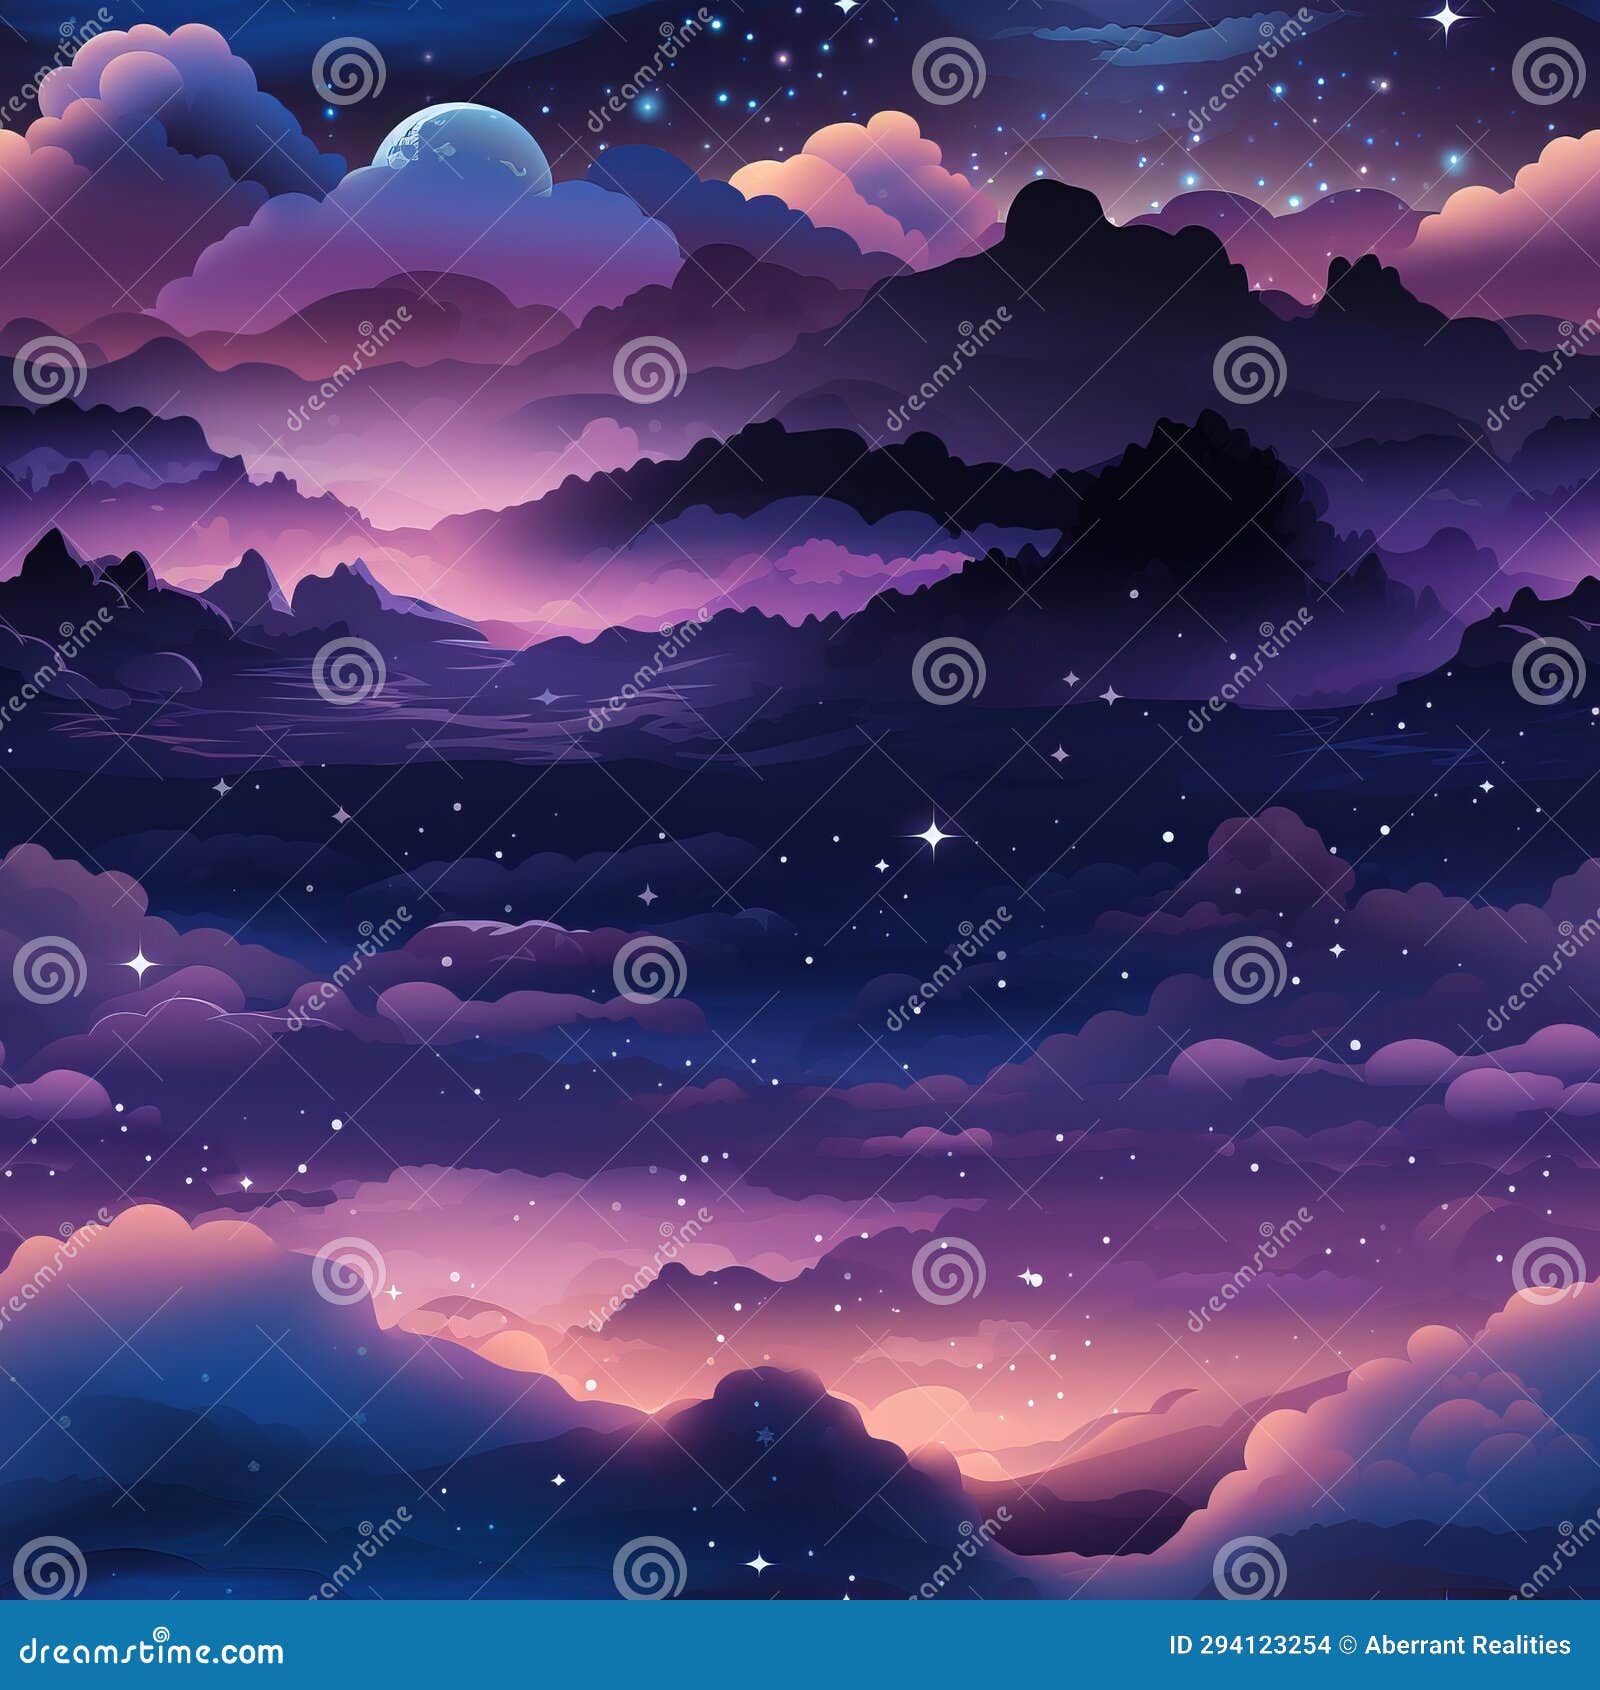 An Illustration of a Night Sky with Clouds and Stars Stock Illustration ...